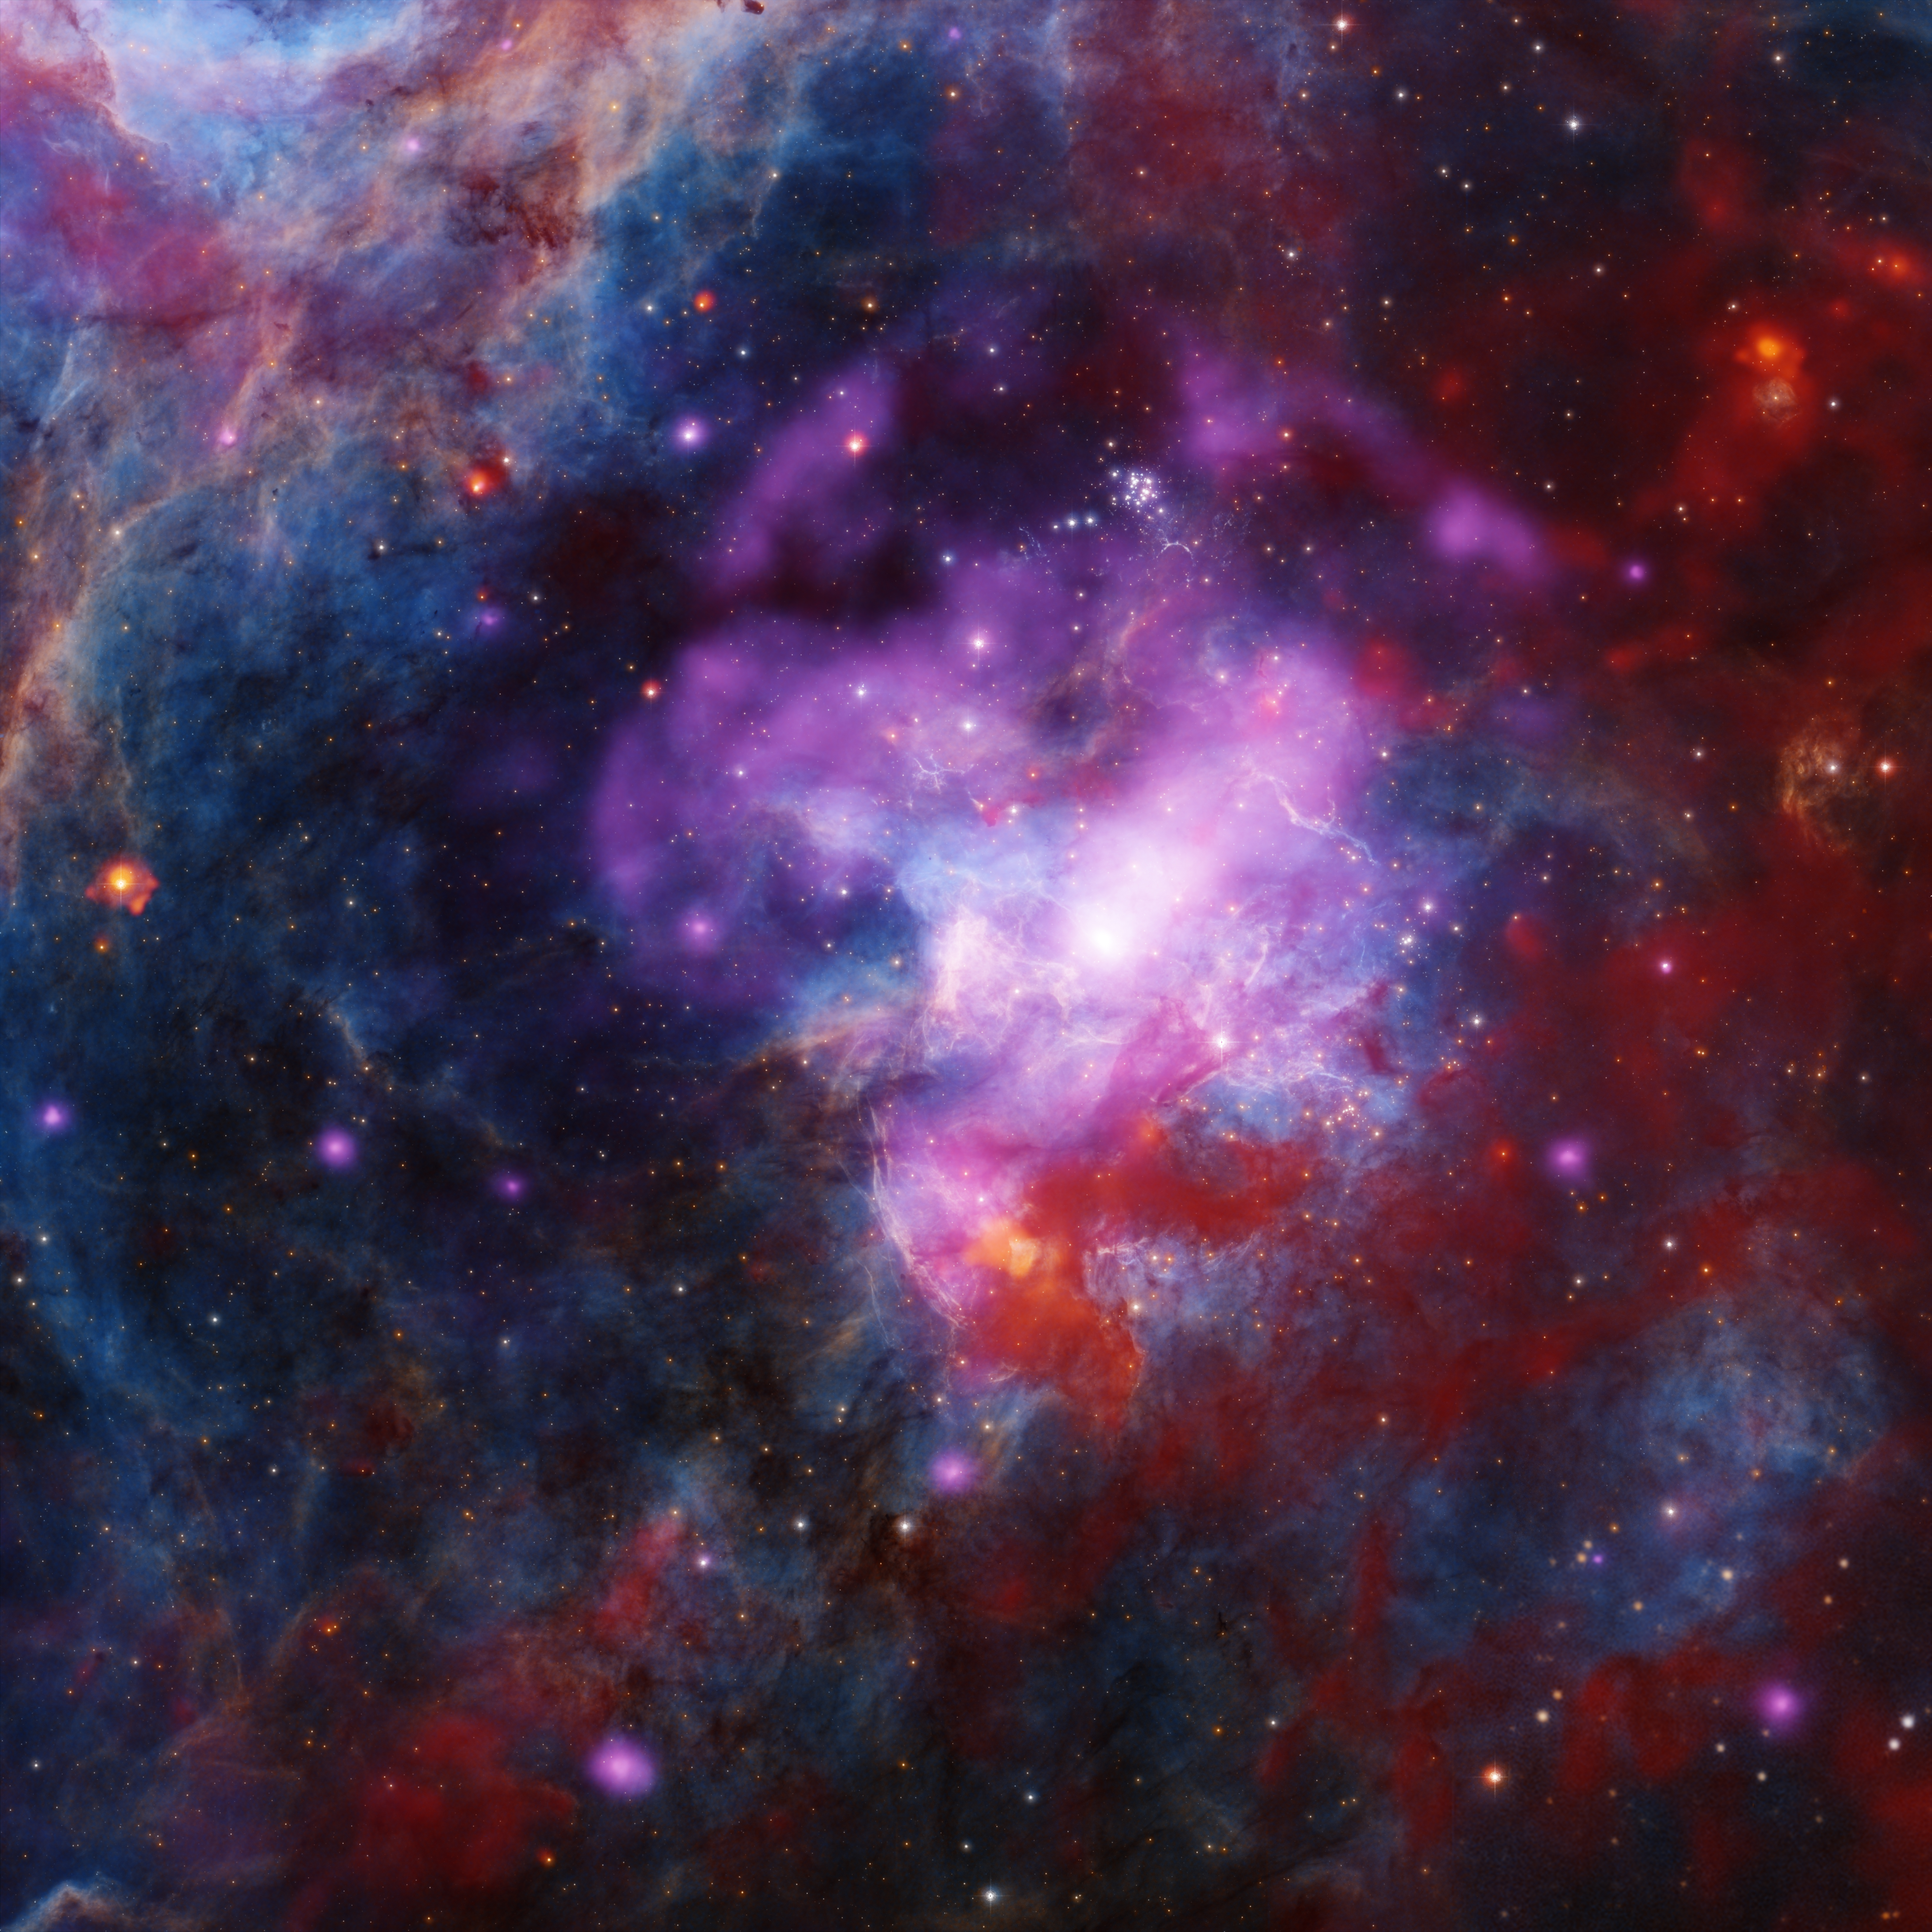 This deep dataset from Chandra of the remains of a supernova known as 30 Doradus B (30 Dor B) reveals evidence for more than one supernova explosion in the history of this remnant. Unusual structures in the Chandra data cannot be explained by a single explosion. These images of 30 Dor B also show optical data from the Blanco telescope in Chile, and infrared data from Spitzer. Additional data from Hubble highlights sharp features in the image.